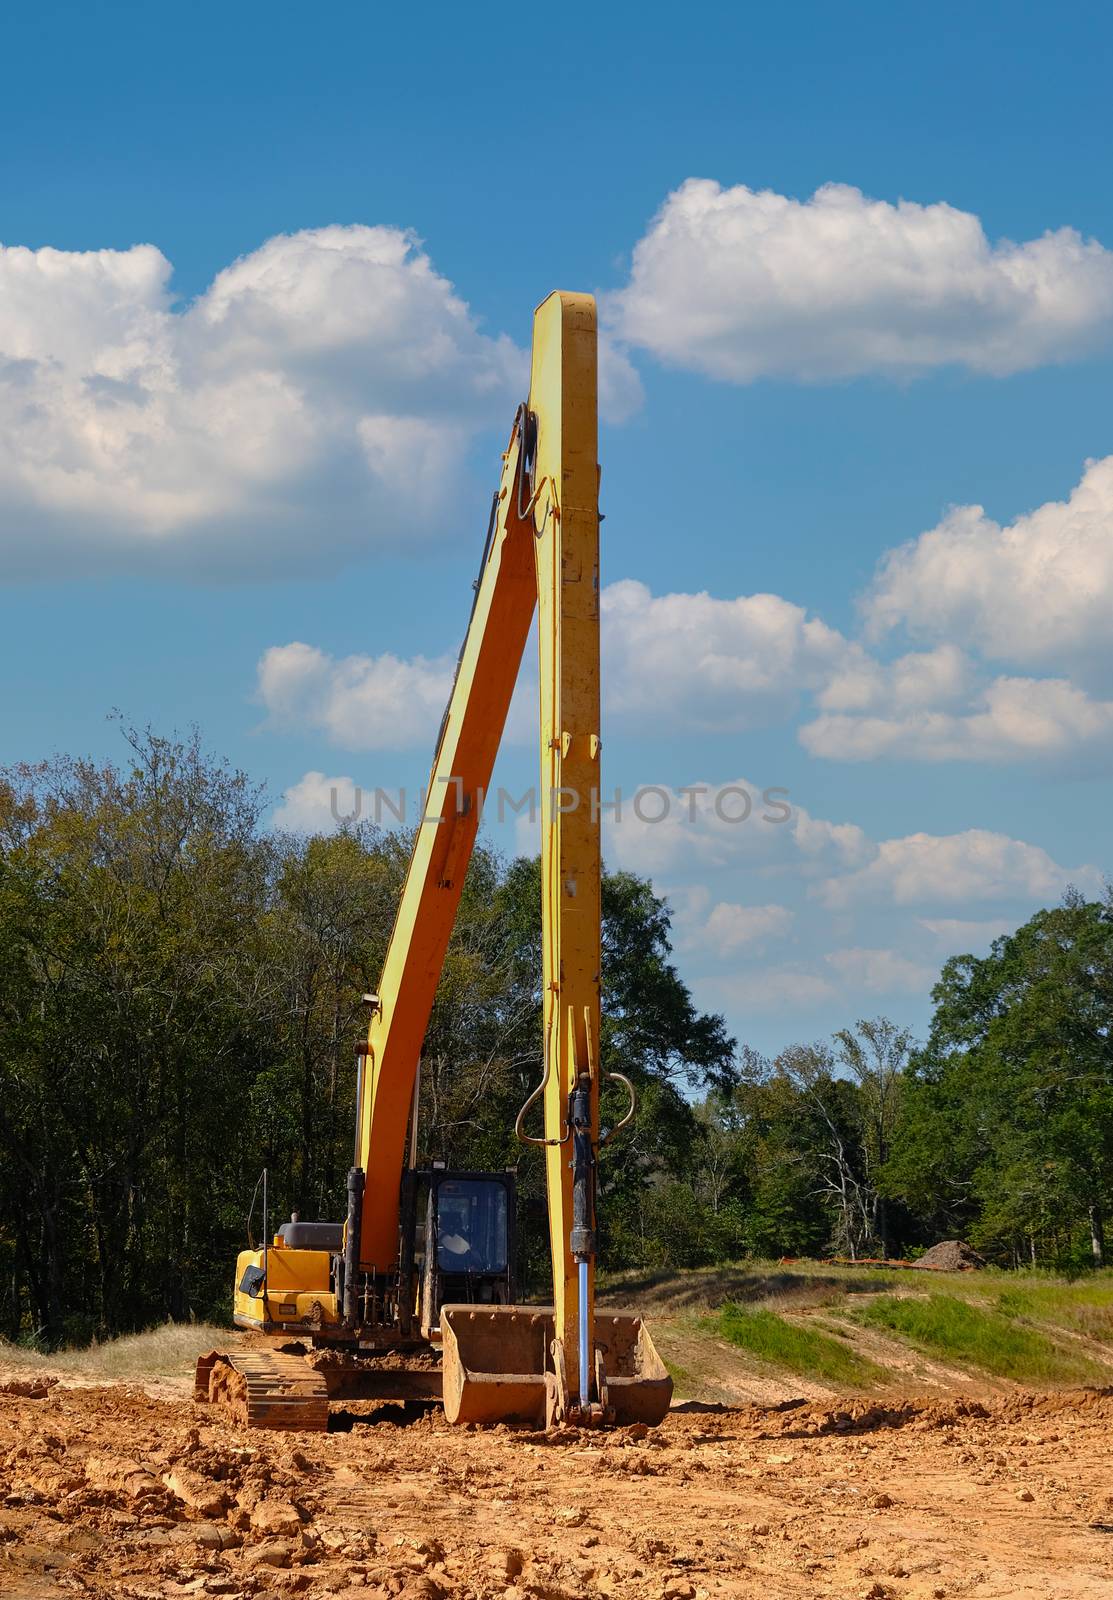 Tall Loader on Graded Construction Site in a Residential Development